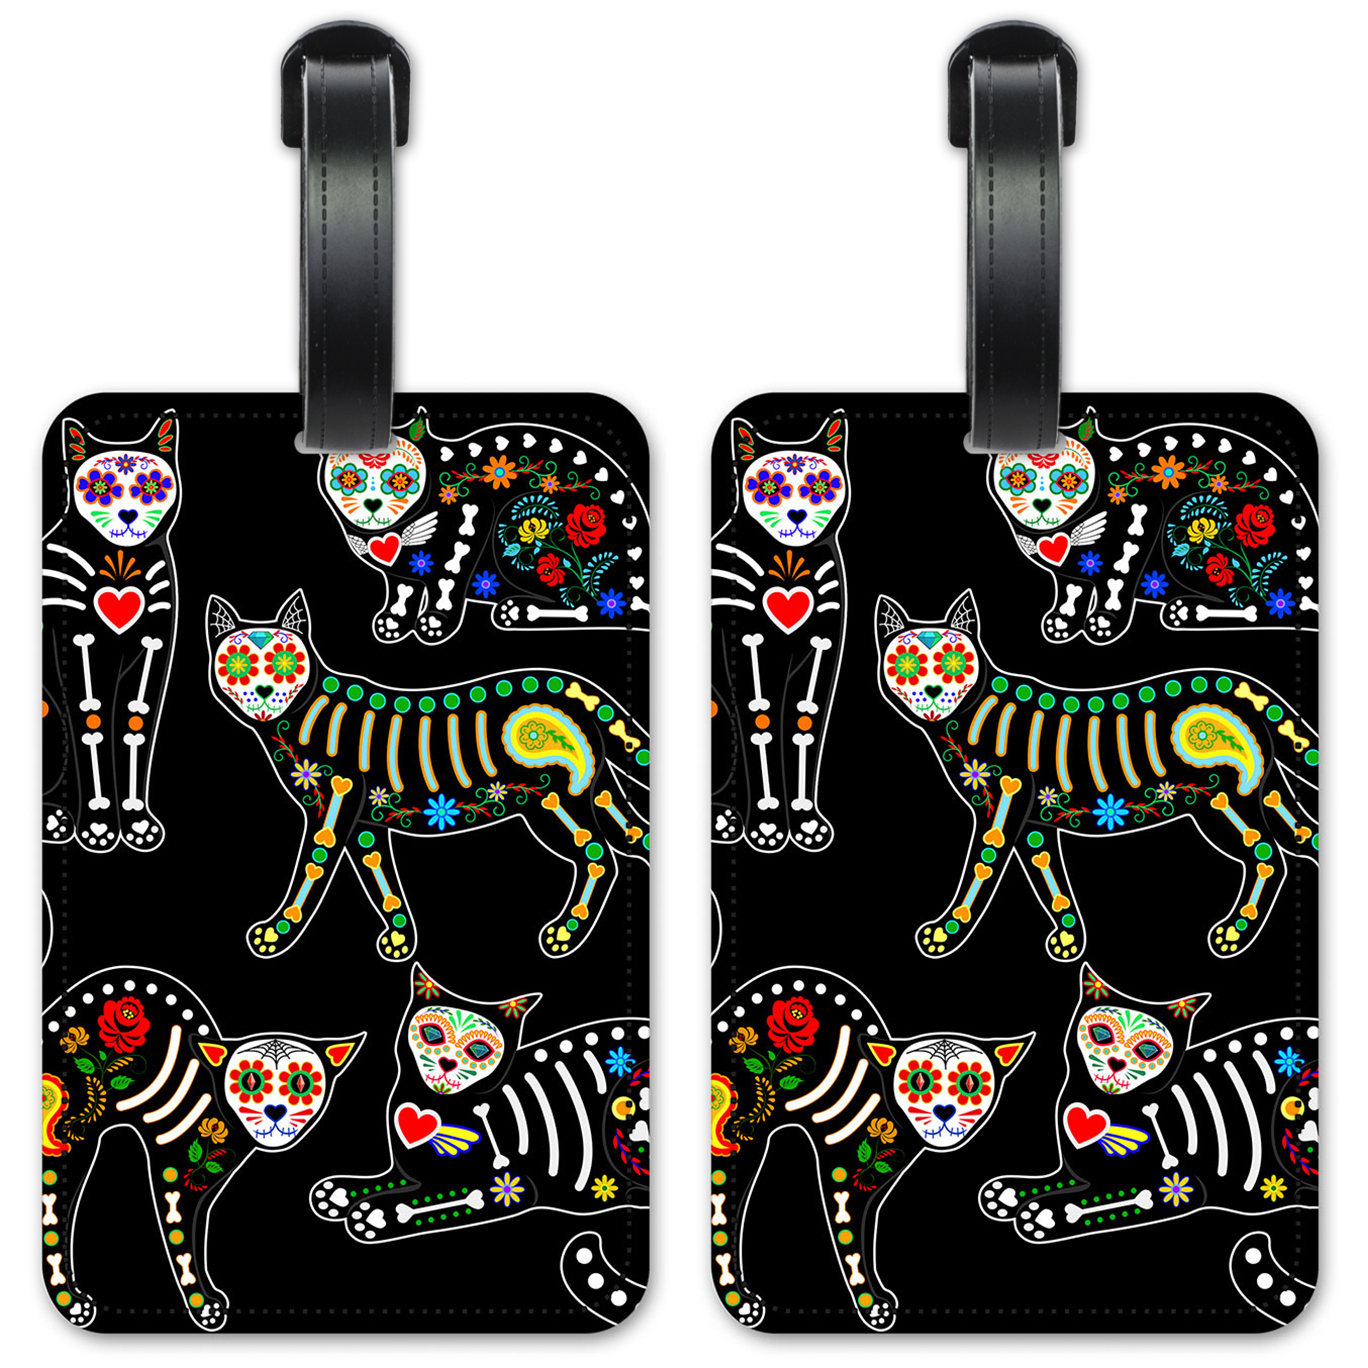 Day of the Dead Cats - #2579